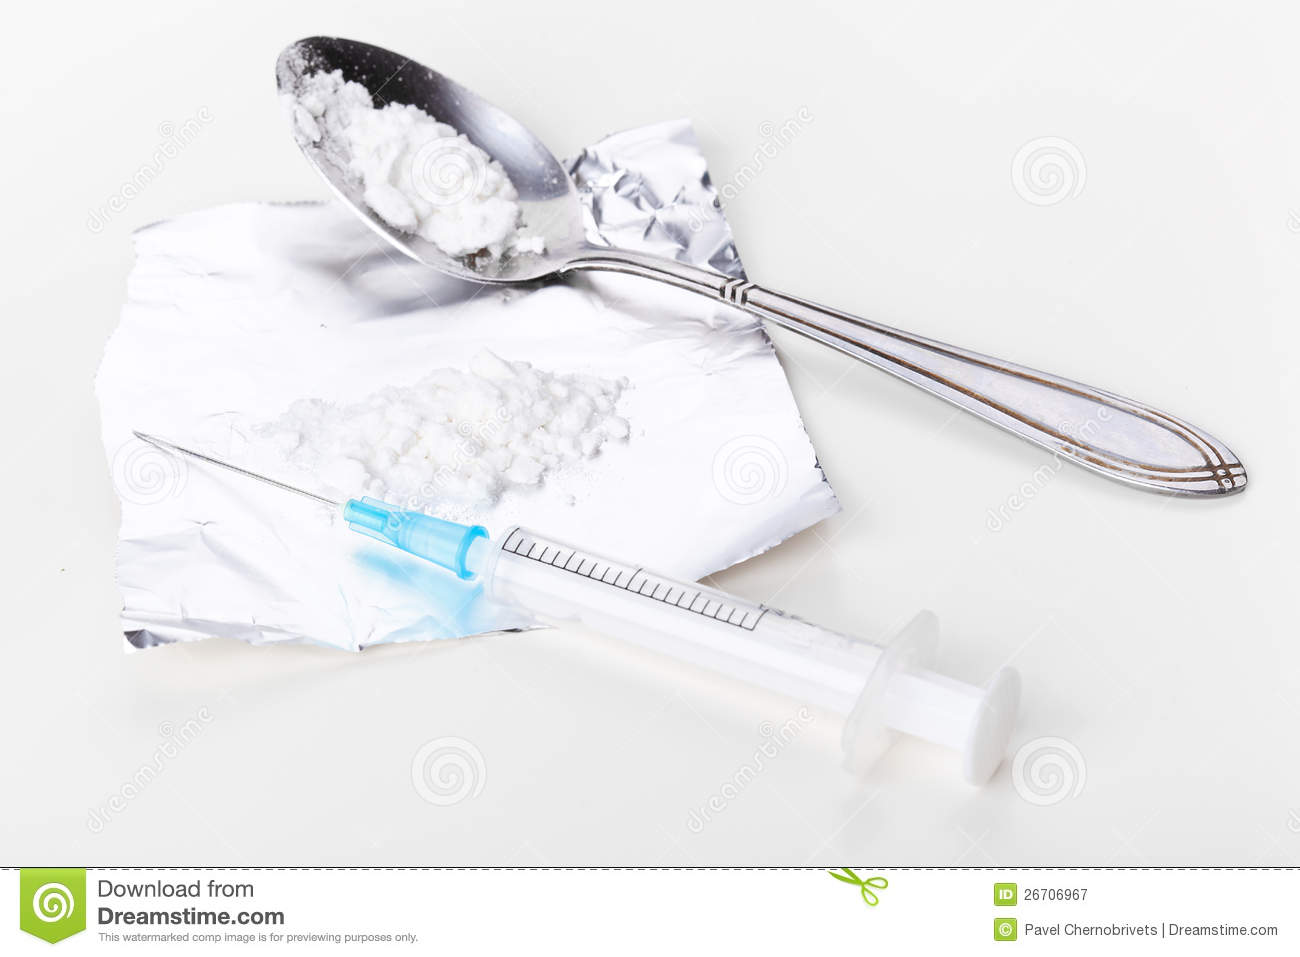 Syringe And Cocaine On Foil Royalty Free Stock Photography   Image